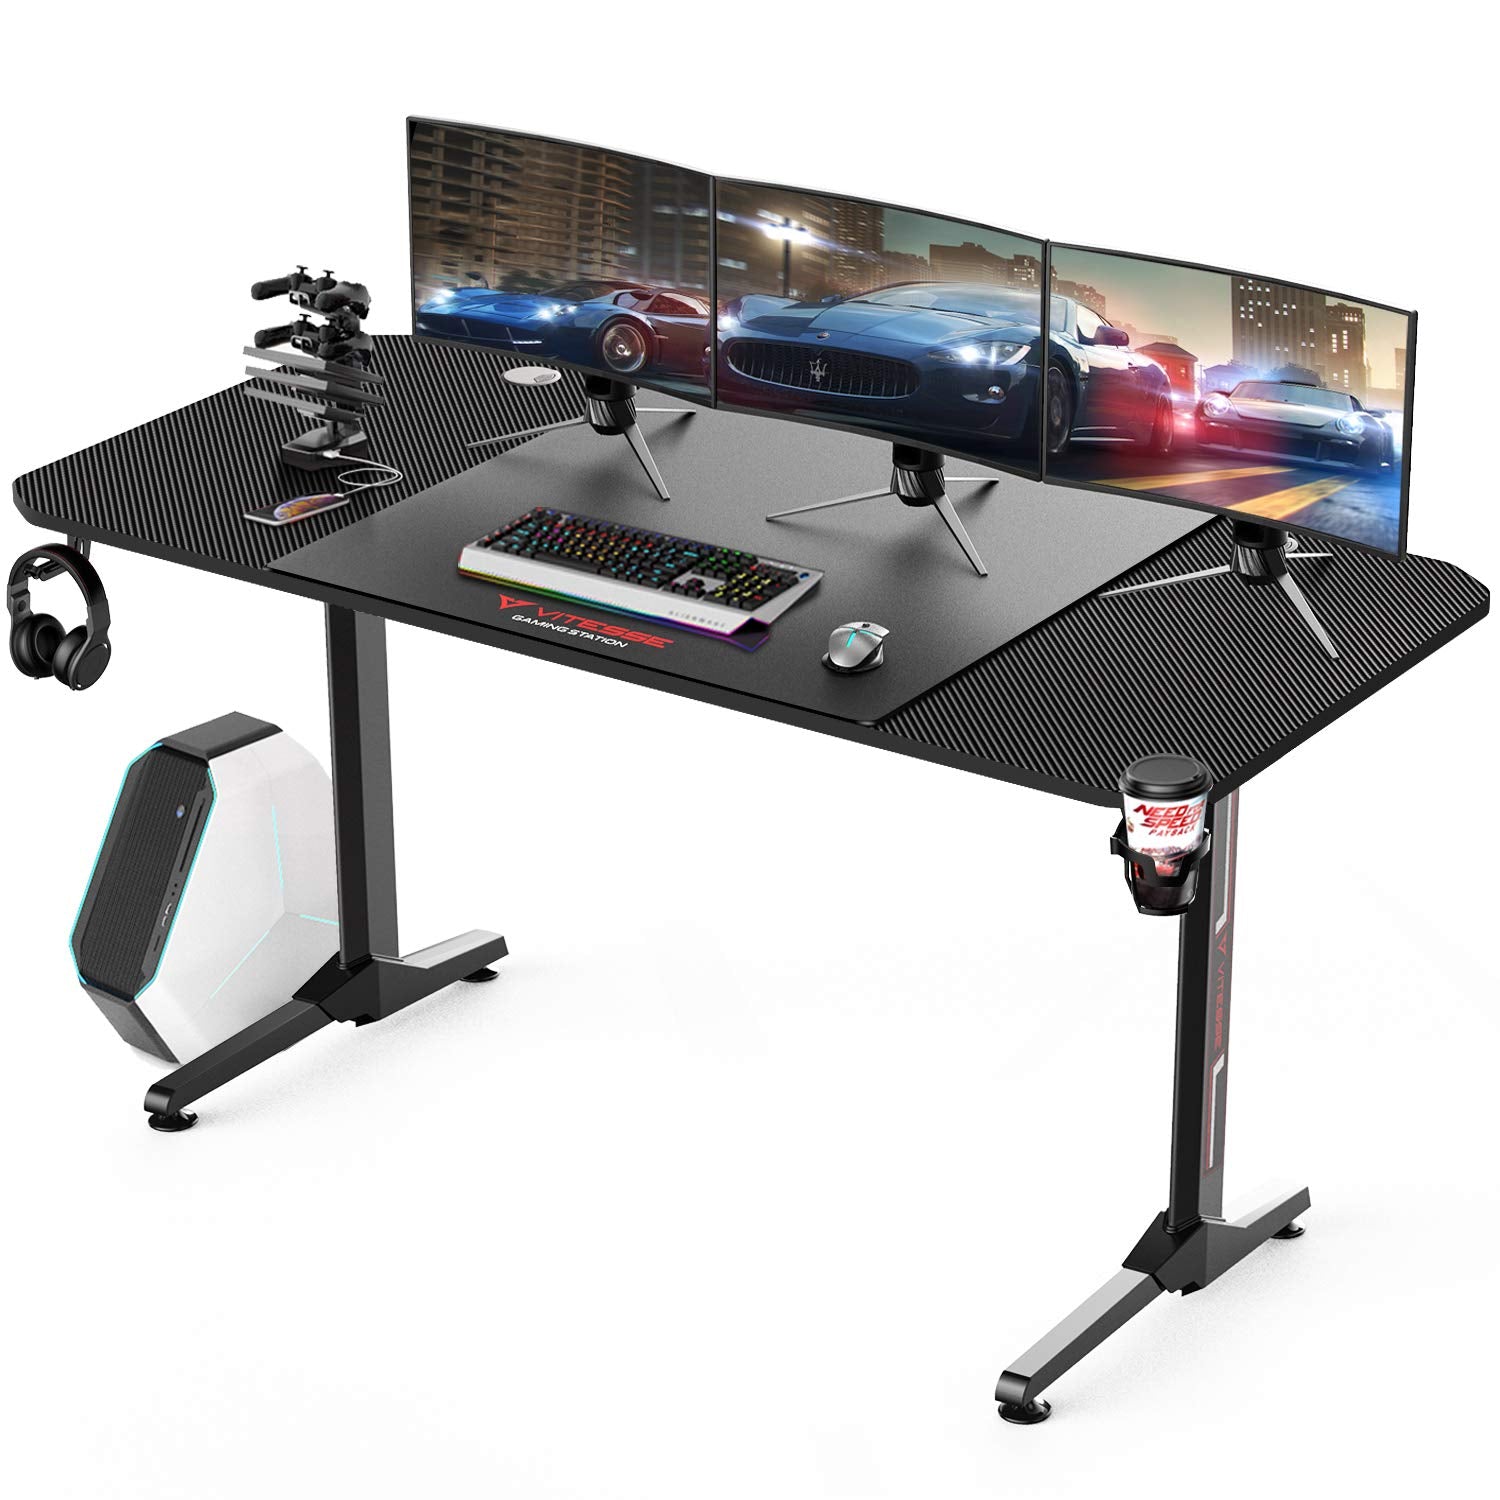 Vitesse Gaming Table- 63 Inches with Free Mouse pad, USB Gaming Handle Rack, Cup Holder & Headphone Hook